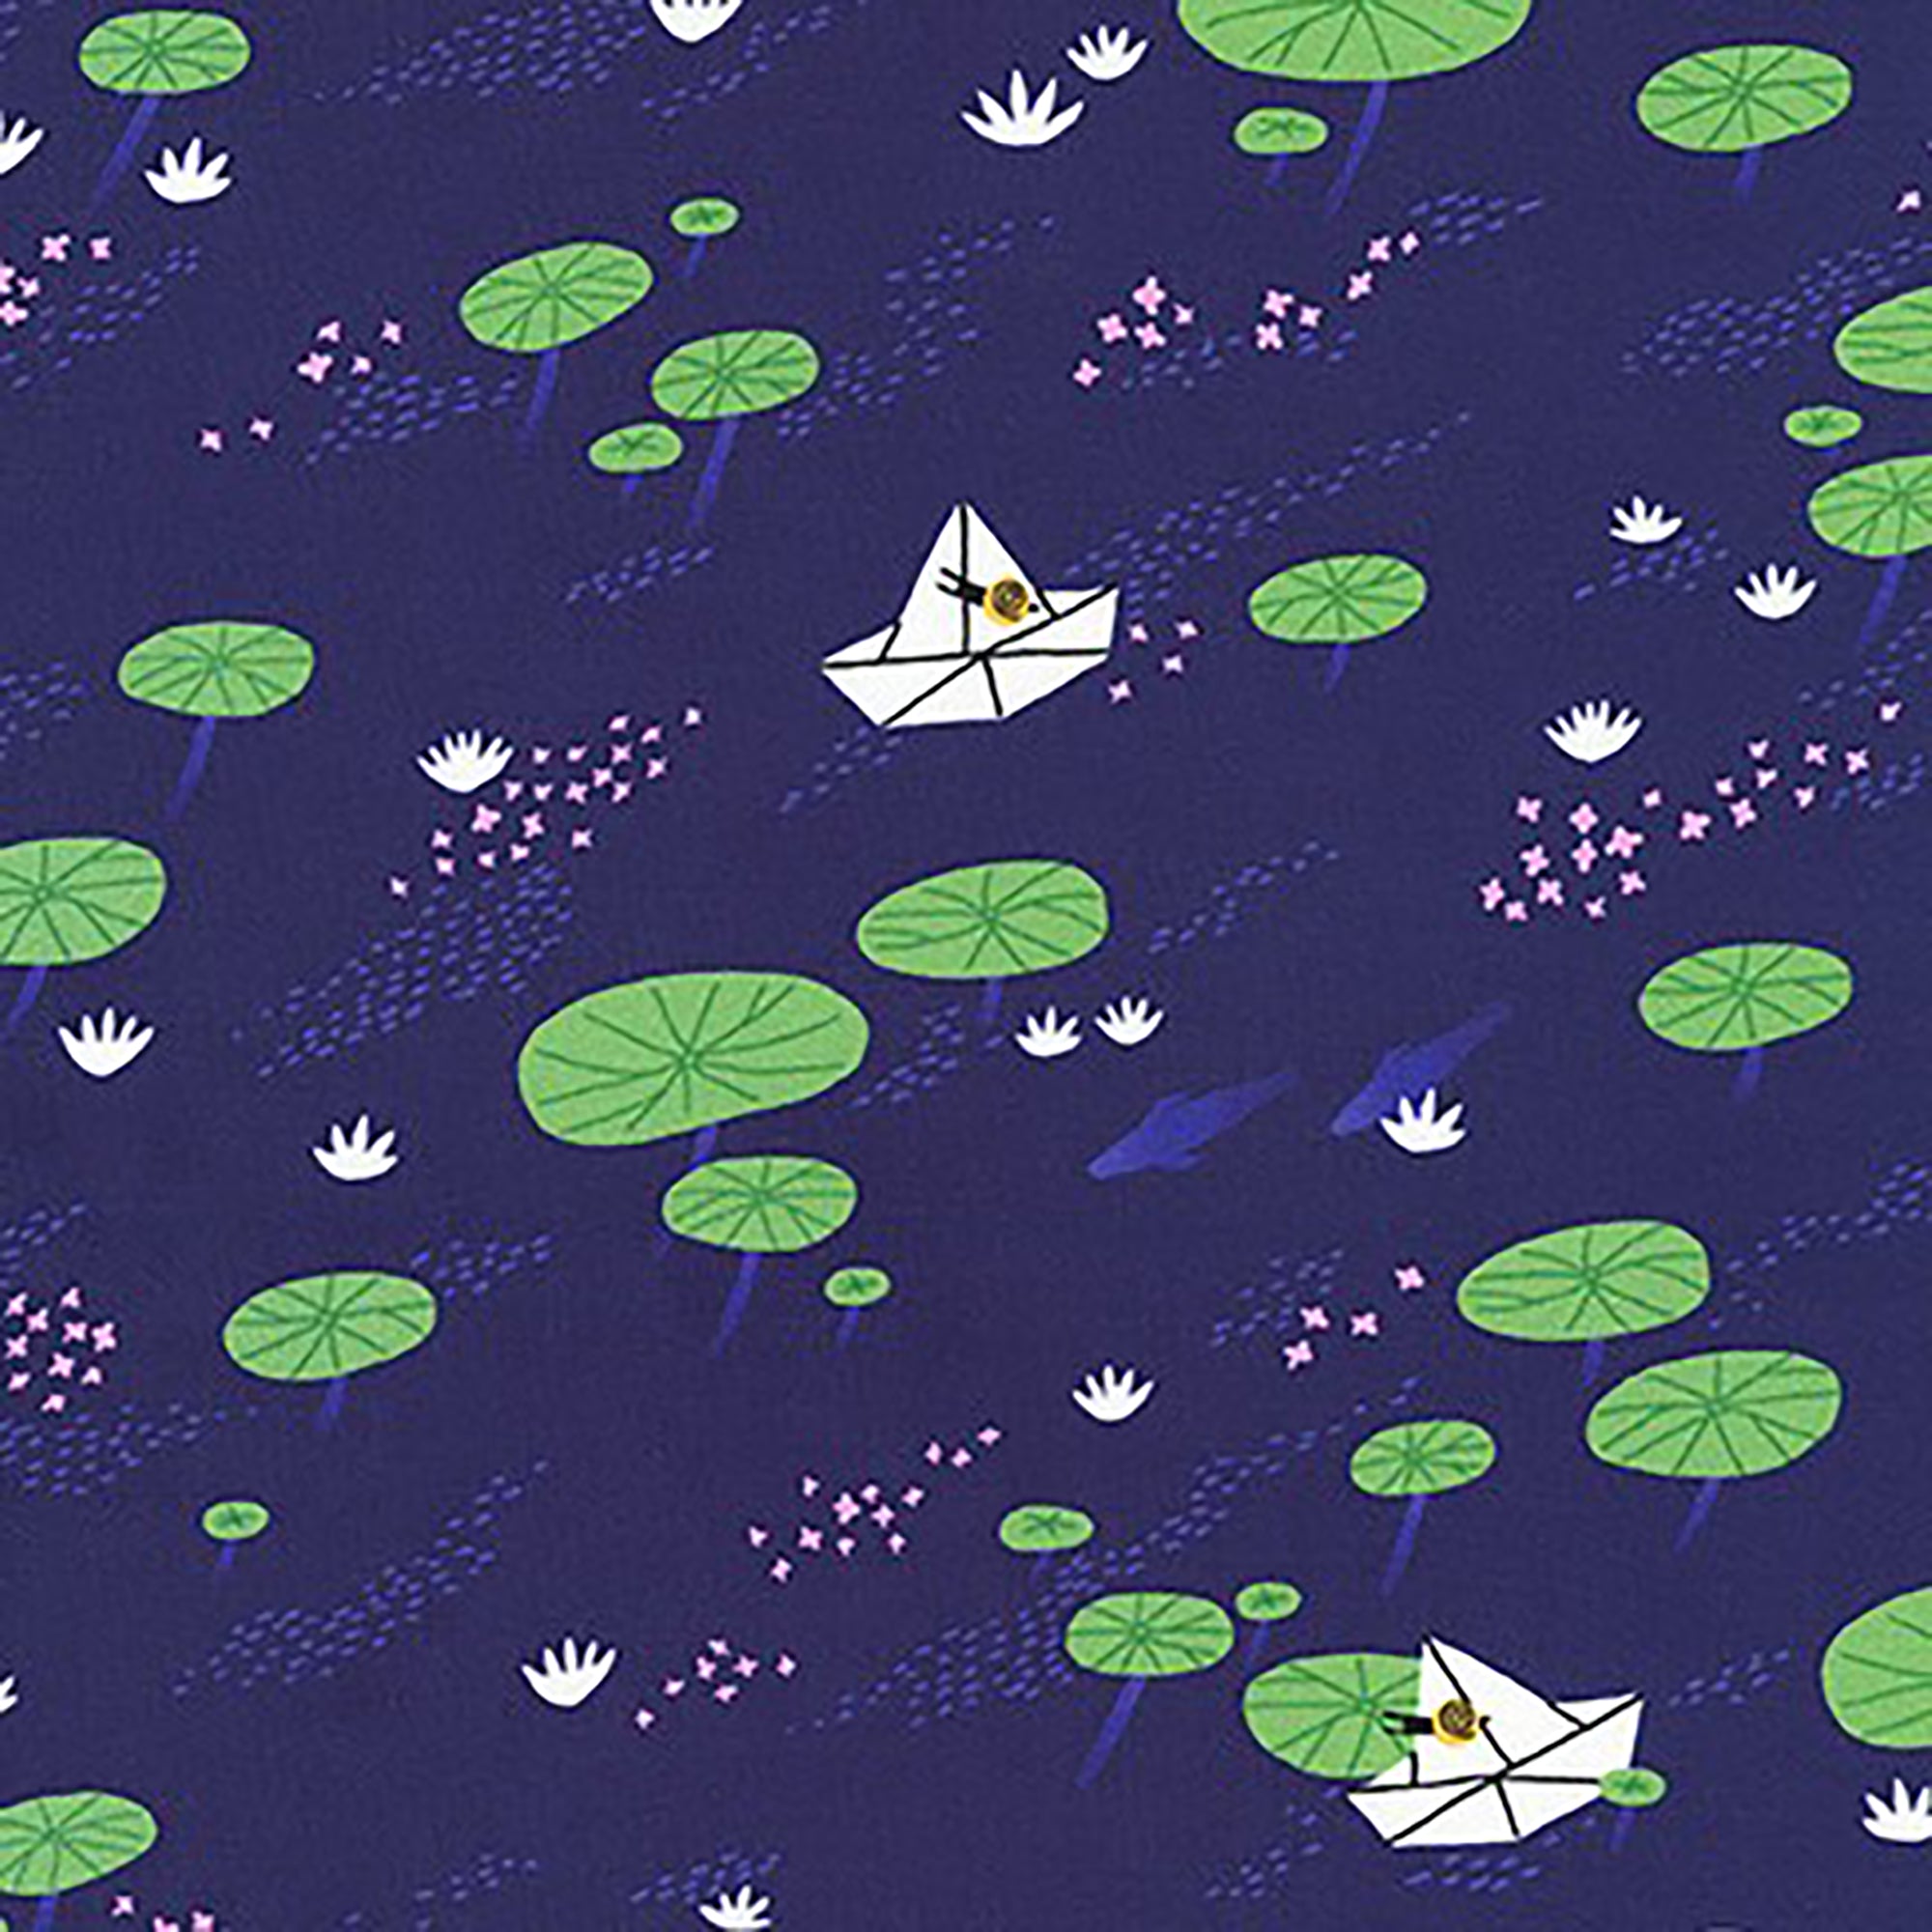 Escargot For It! - Lily Pond Lake Fabric